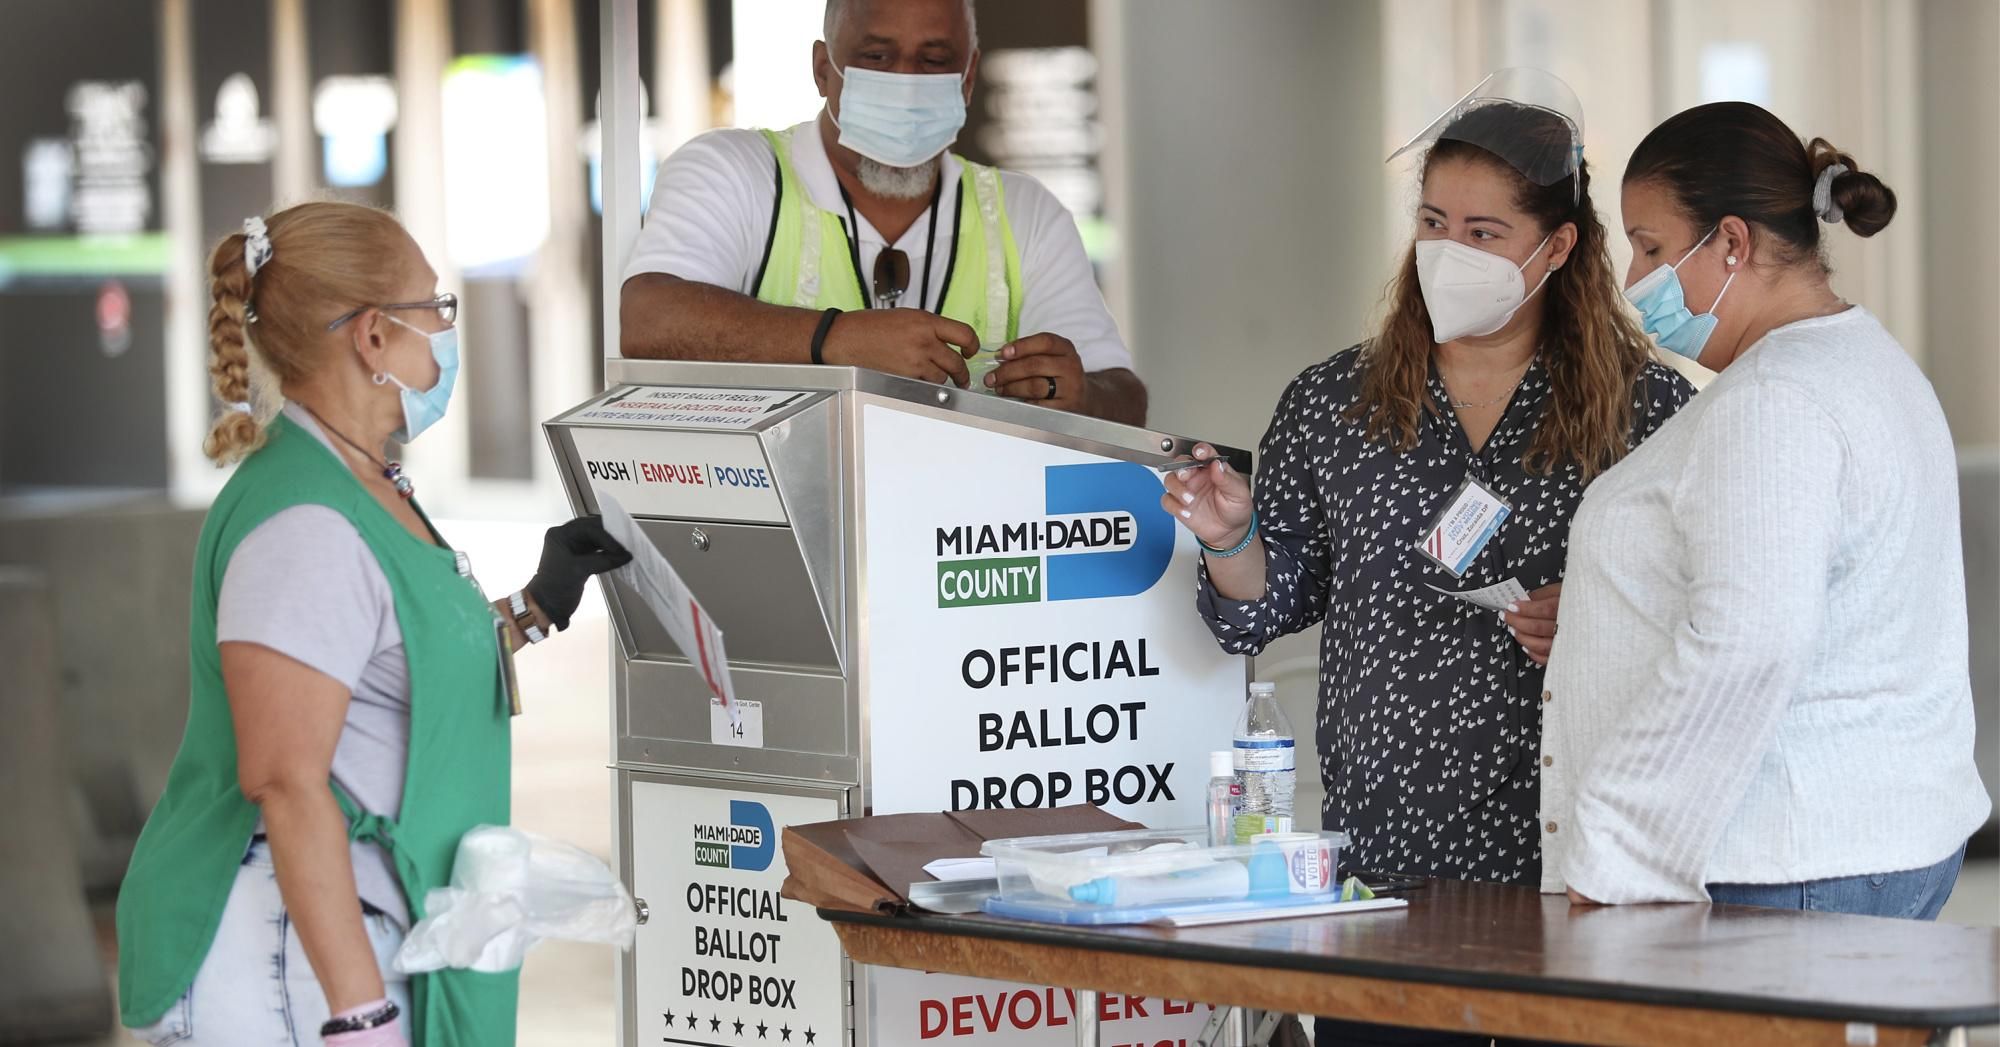 Poll workers help a voter put their mail-in ballot in an official Miami-Dade County ballot drop box on August 11, 2020 in Florida. (Photo: Joe Raedle/Getty Images)